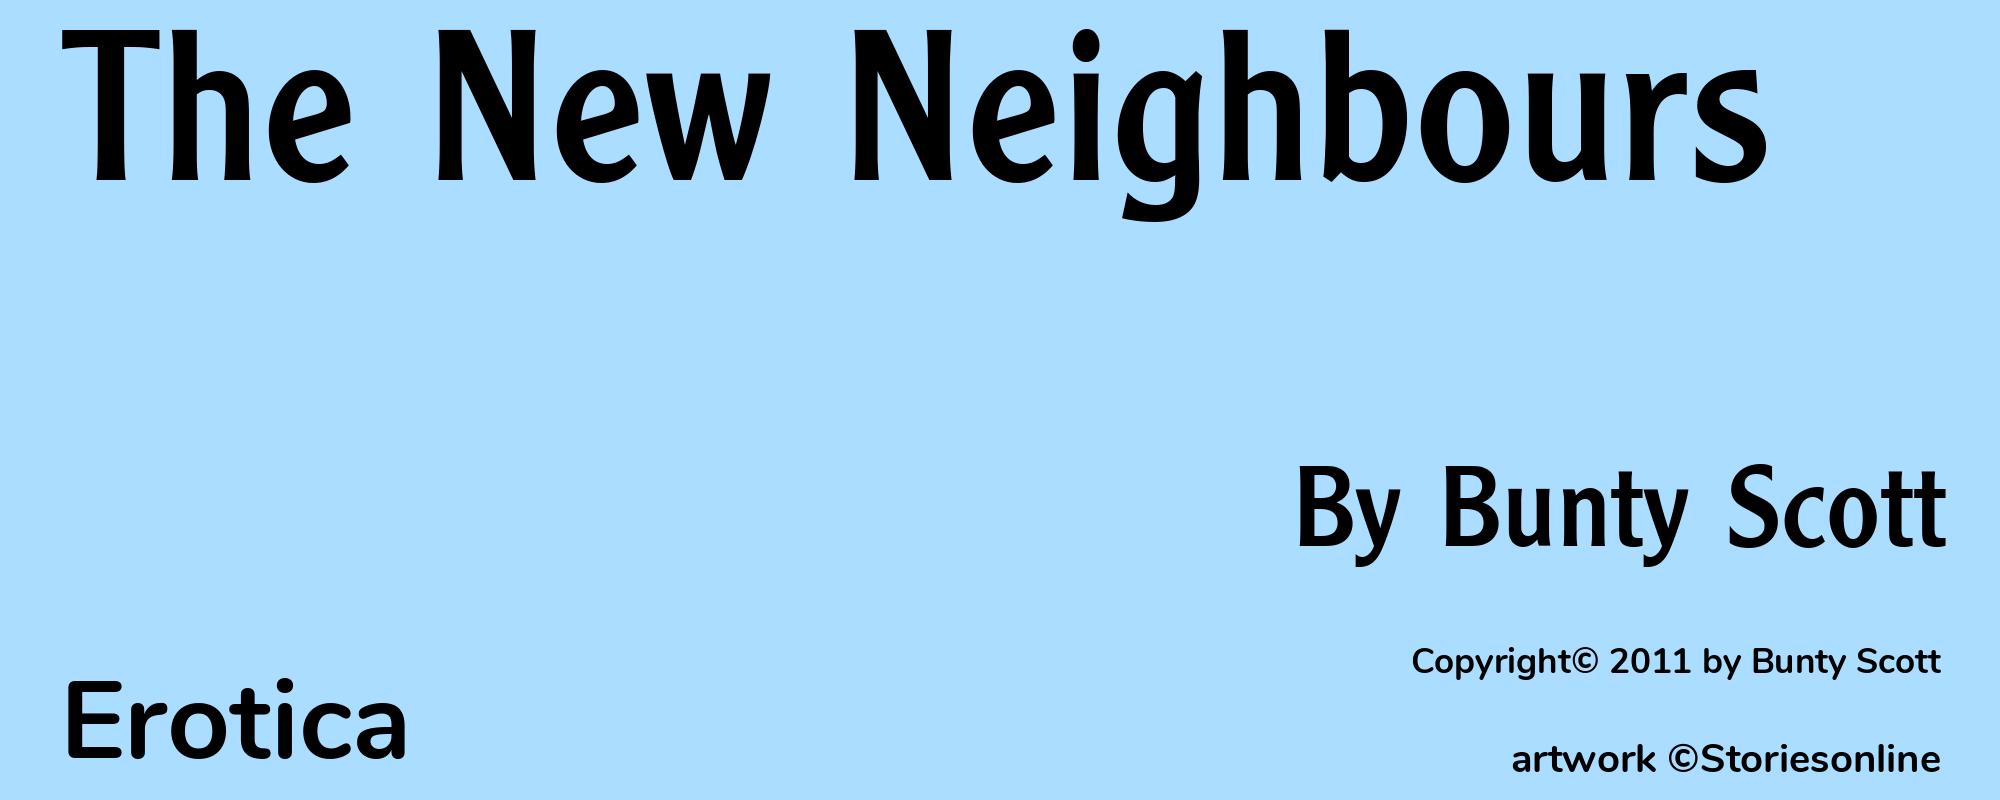 The New Neighbours - Cover